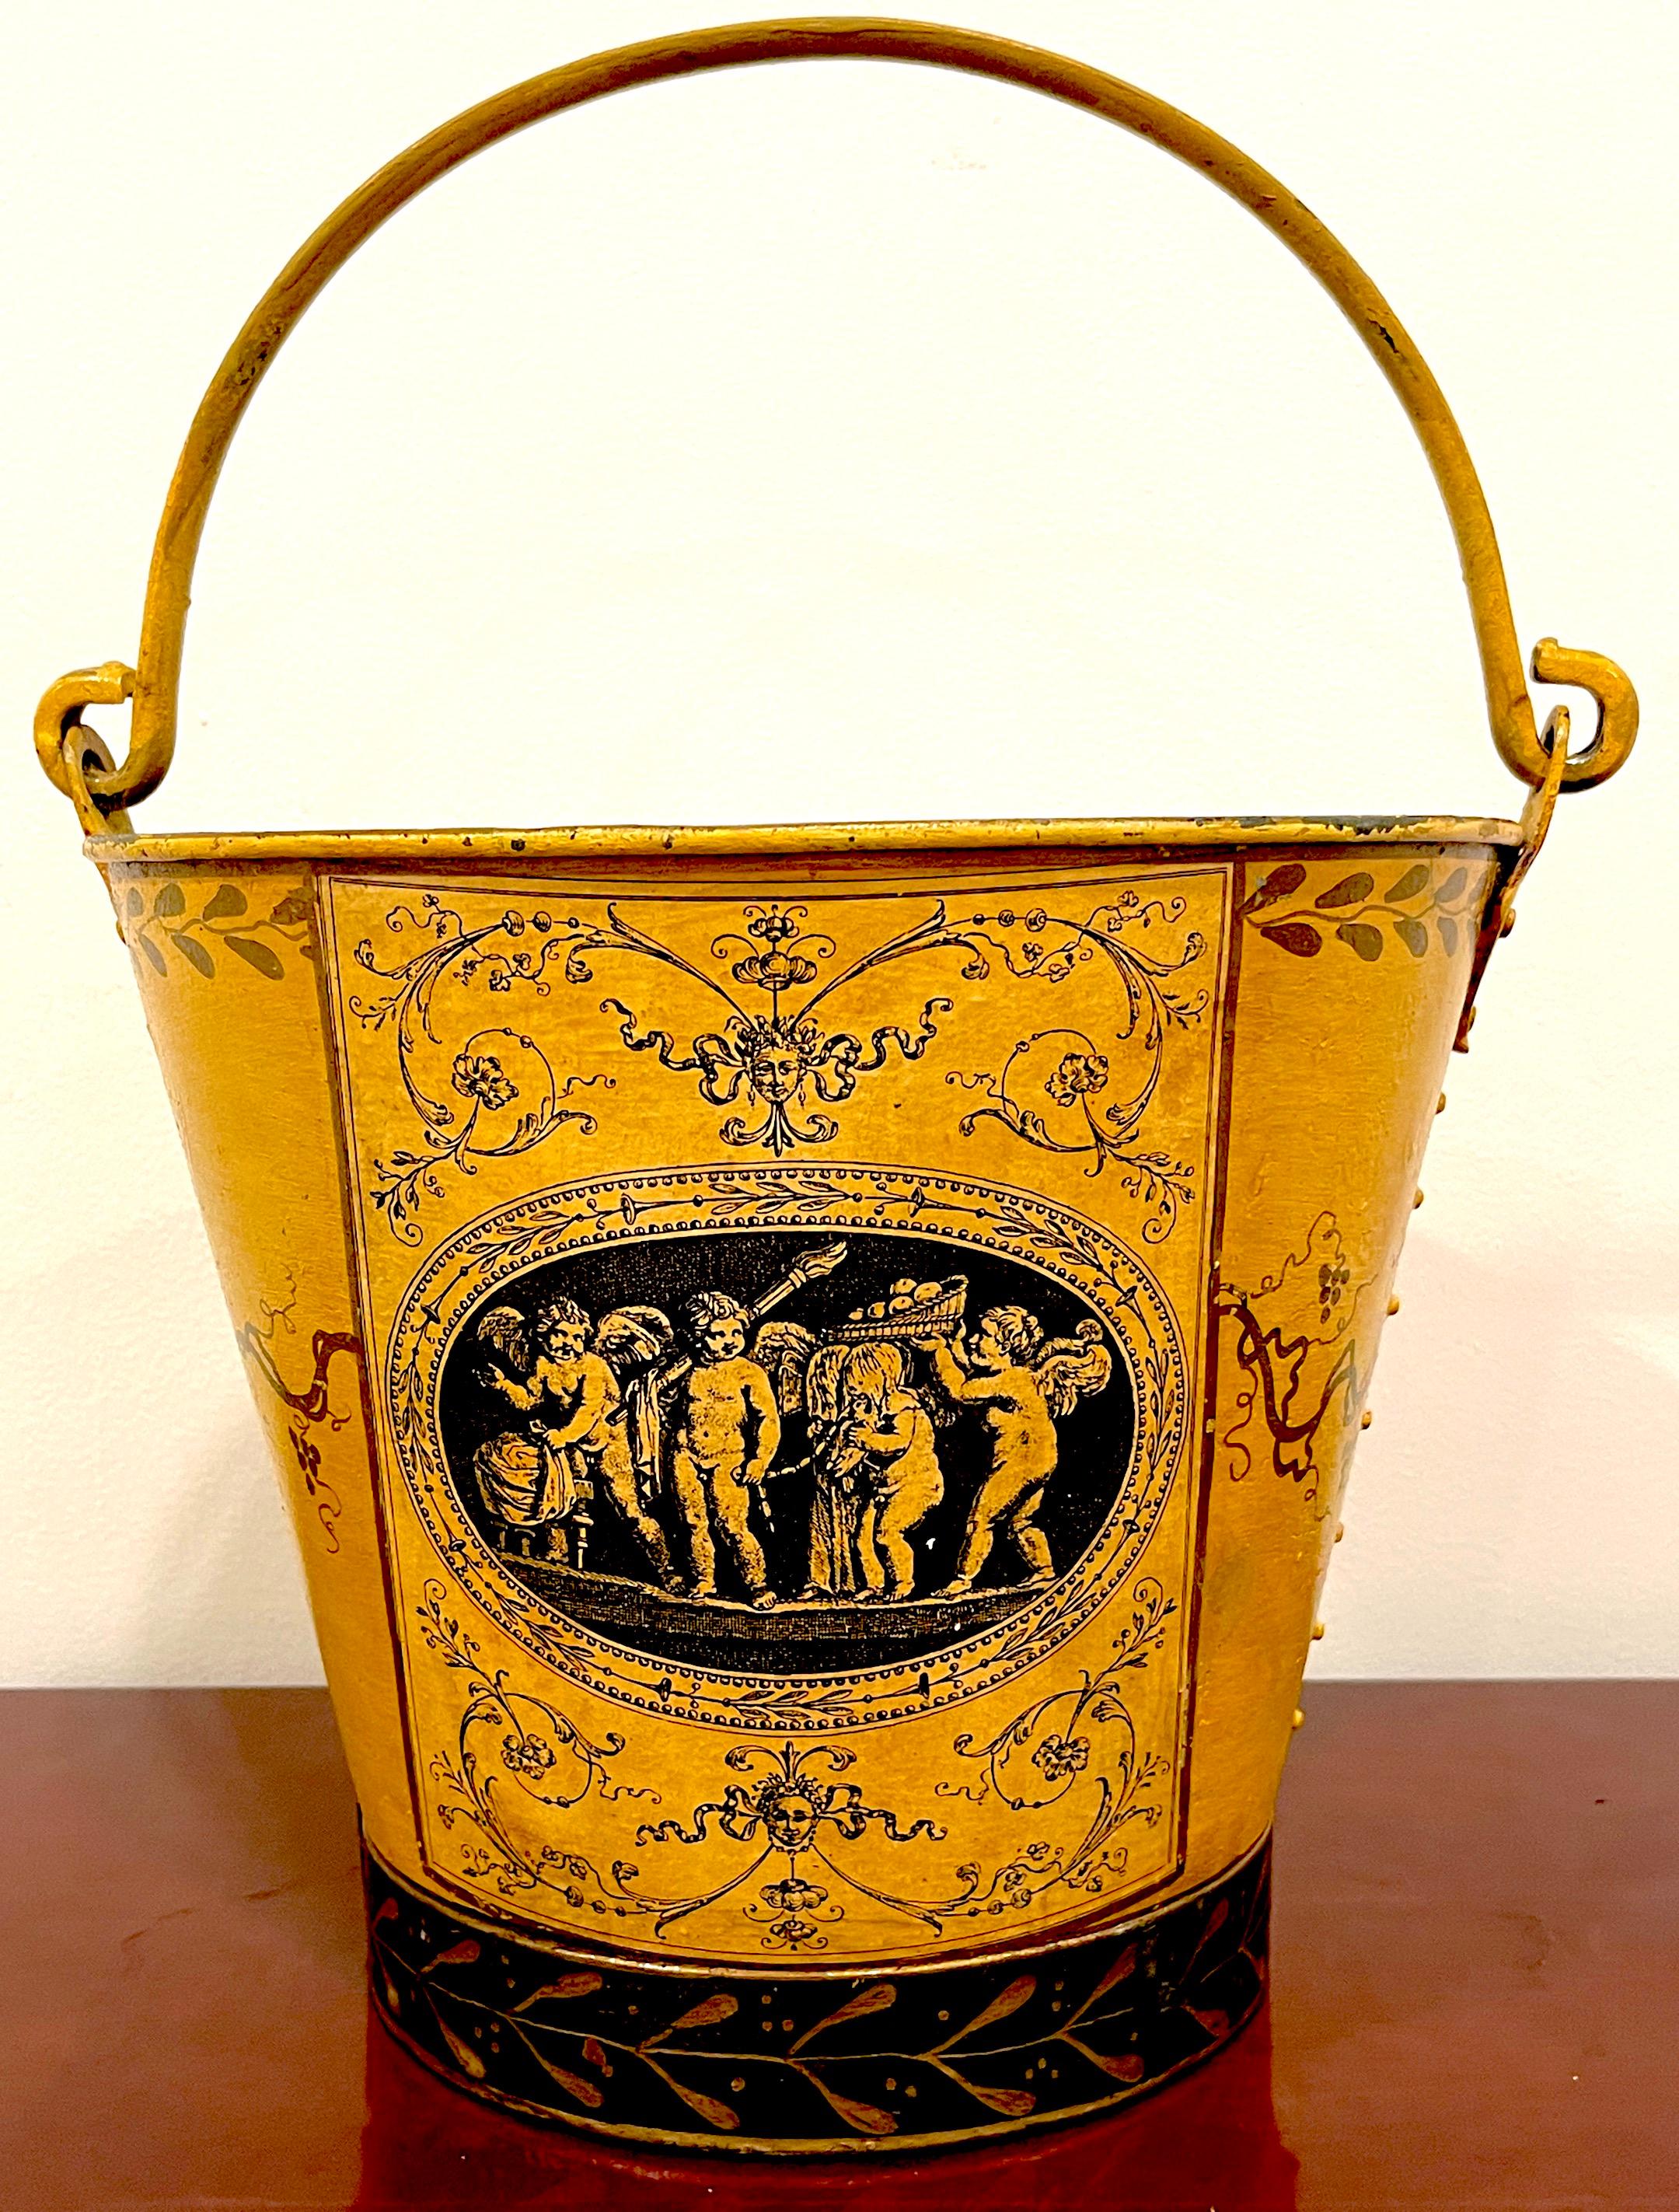 Antique French Tole Handled Bucket/Cachepot 'Labors of Cupid' 
France, Circa 1900
A delightful Antique French Tole Handled Bucket/Cachepot, dating back to the early 1900s, originating from France. This charming piece exudes whimsy and craftsmanship.